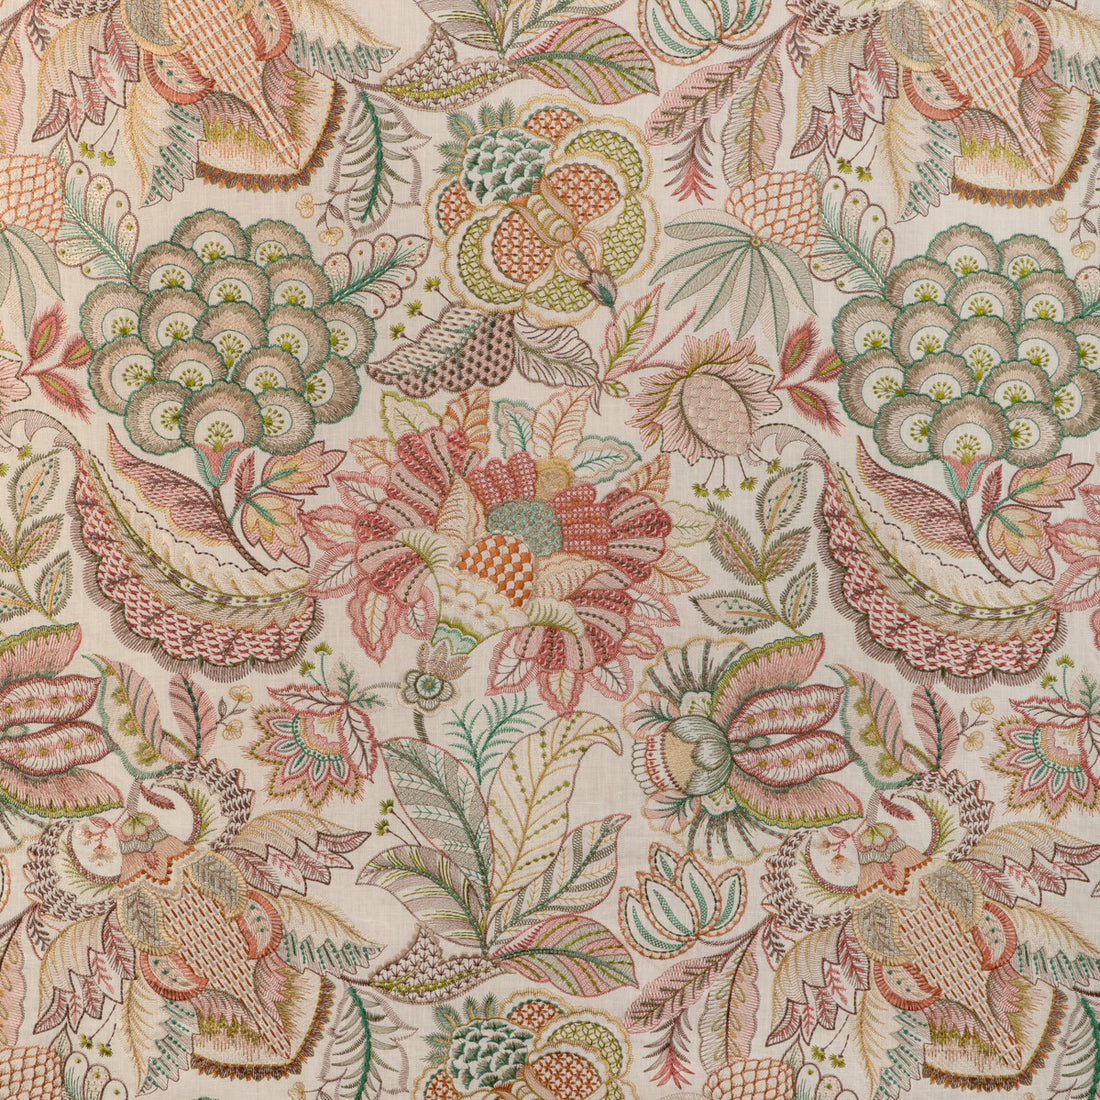 Eden Emb fabric in pink/multi color - pattern 2023145.73.0 - by Lee Jofa in the Garden Walk collection